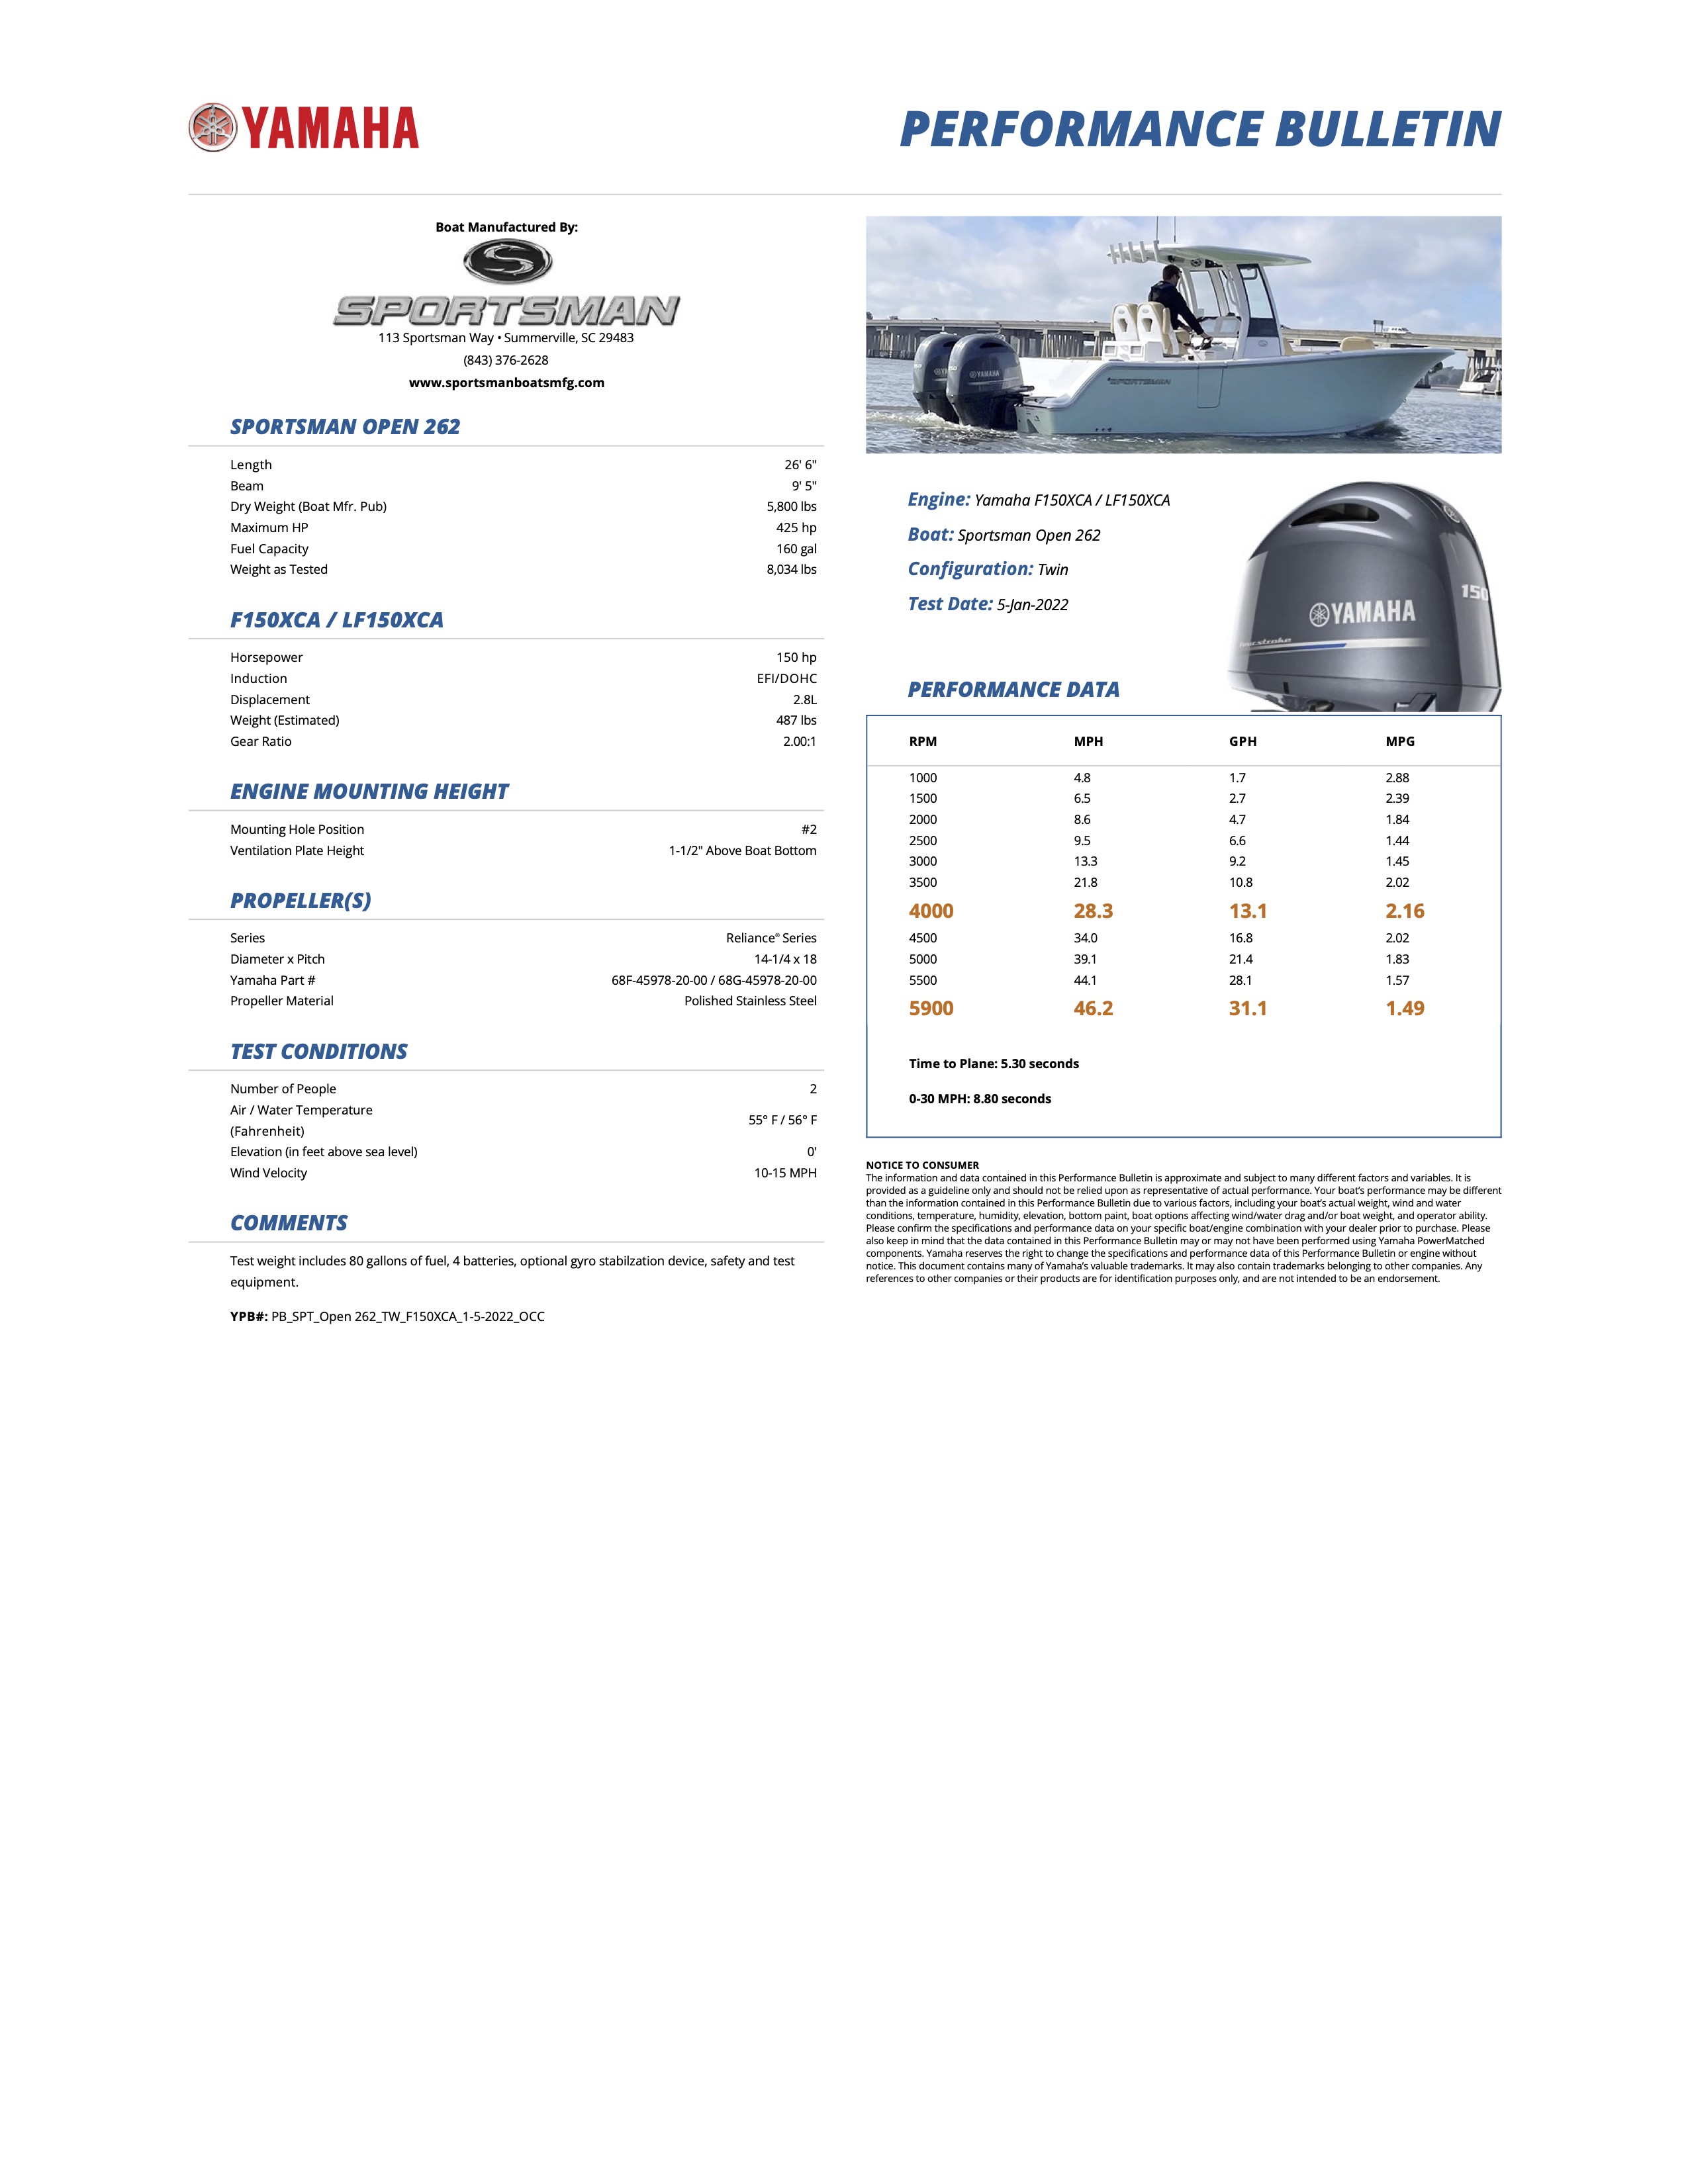 Performance bulletin for 262-center-console